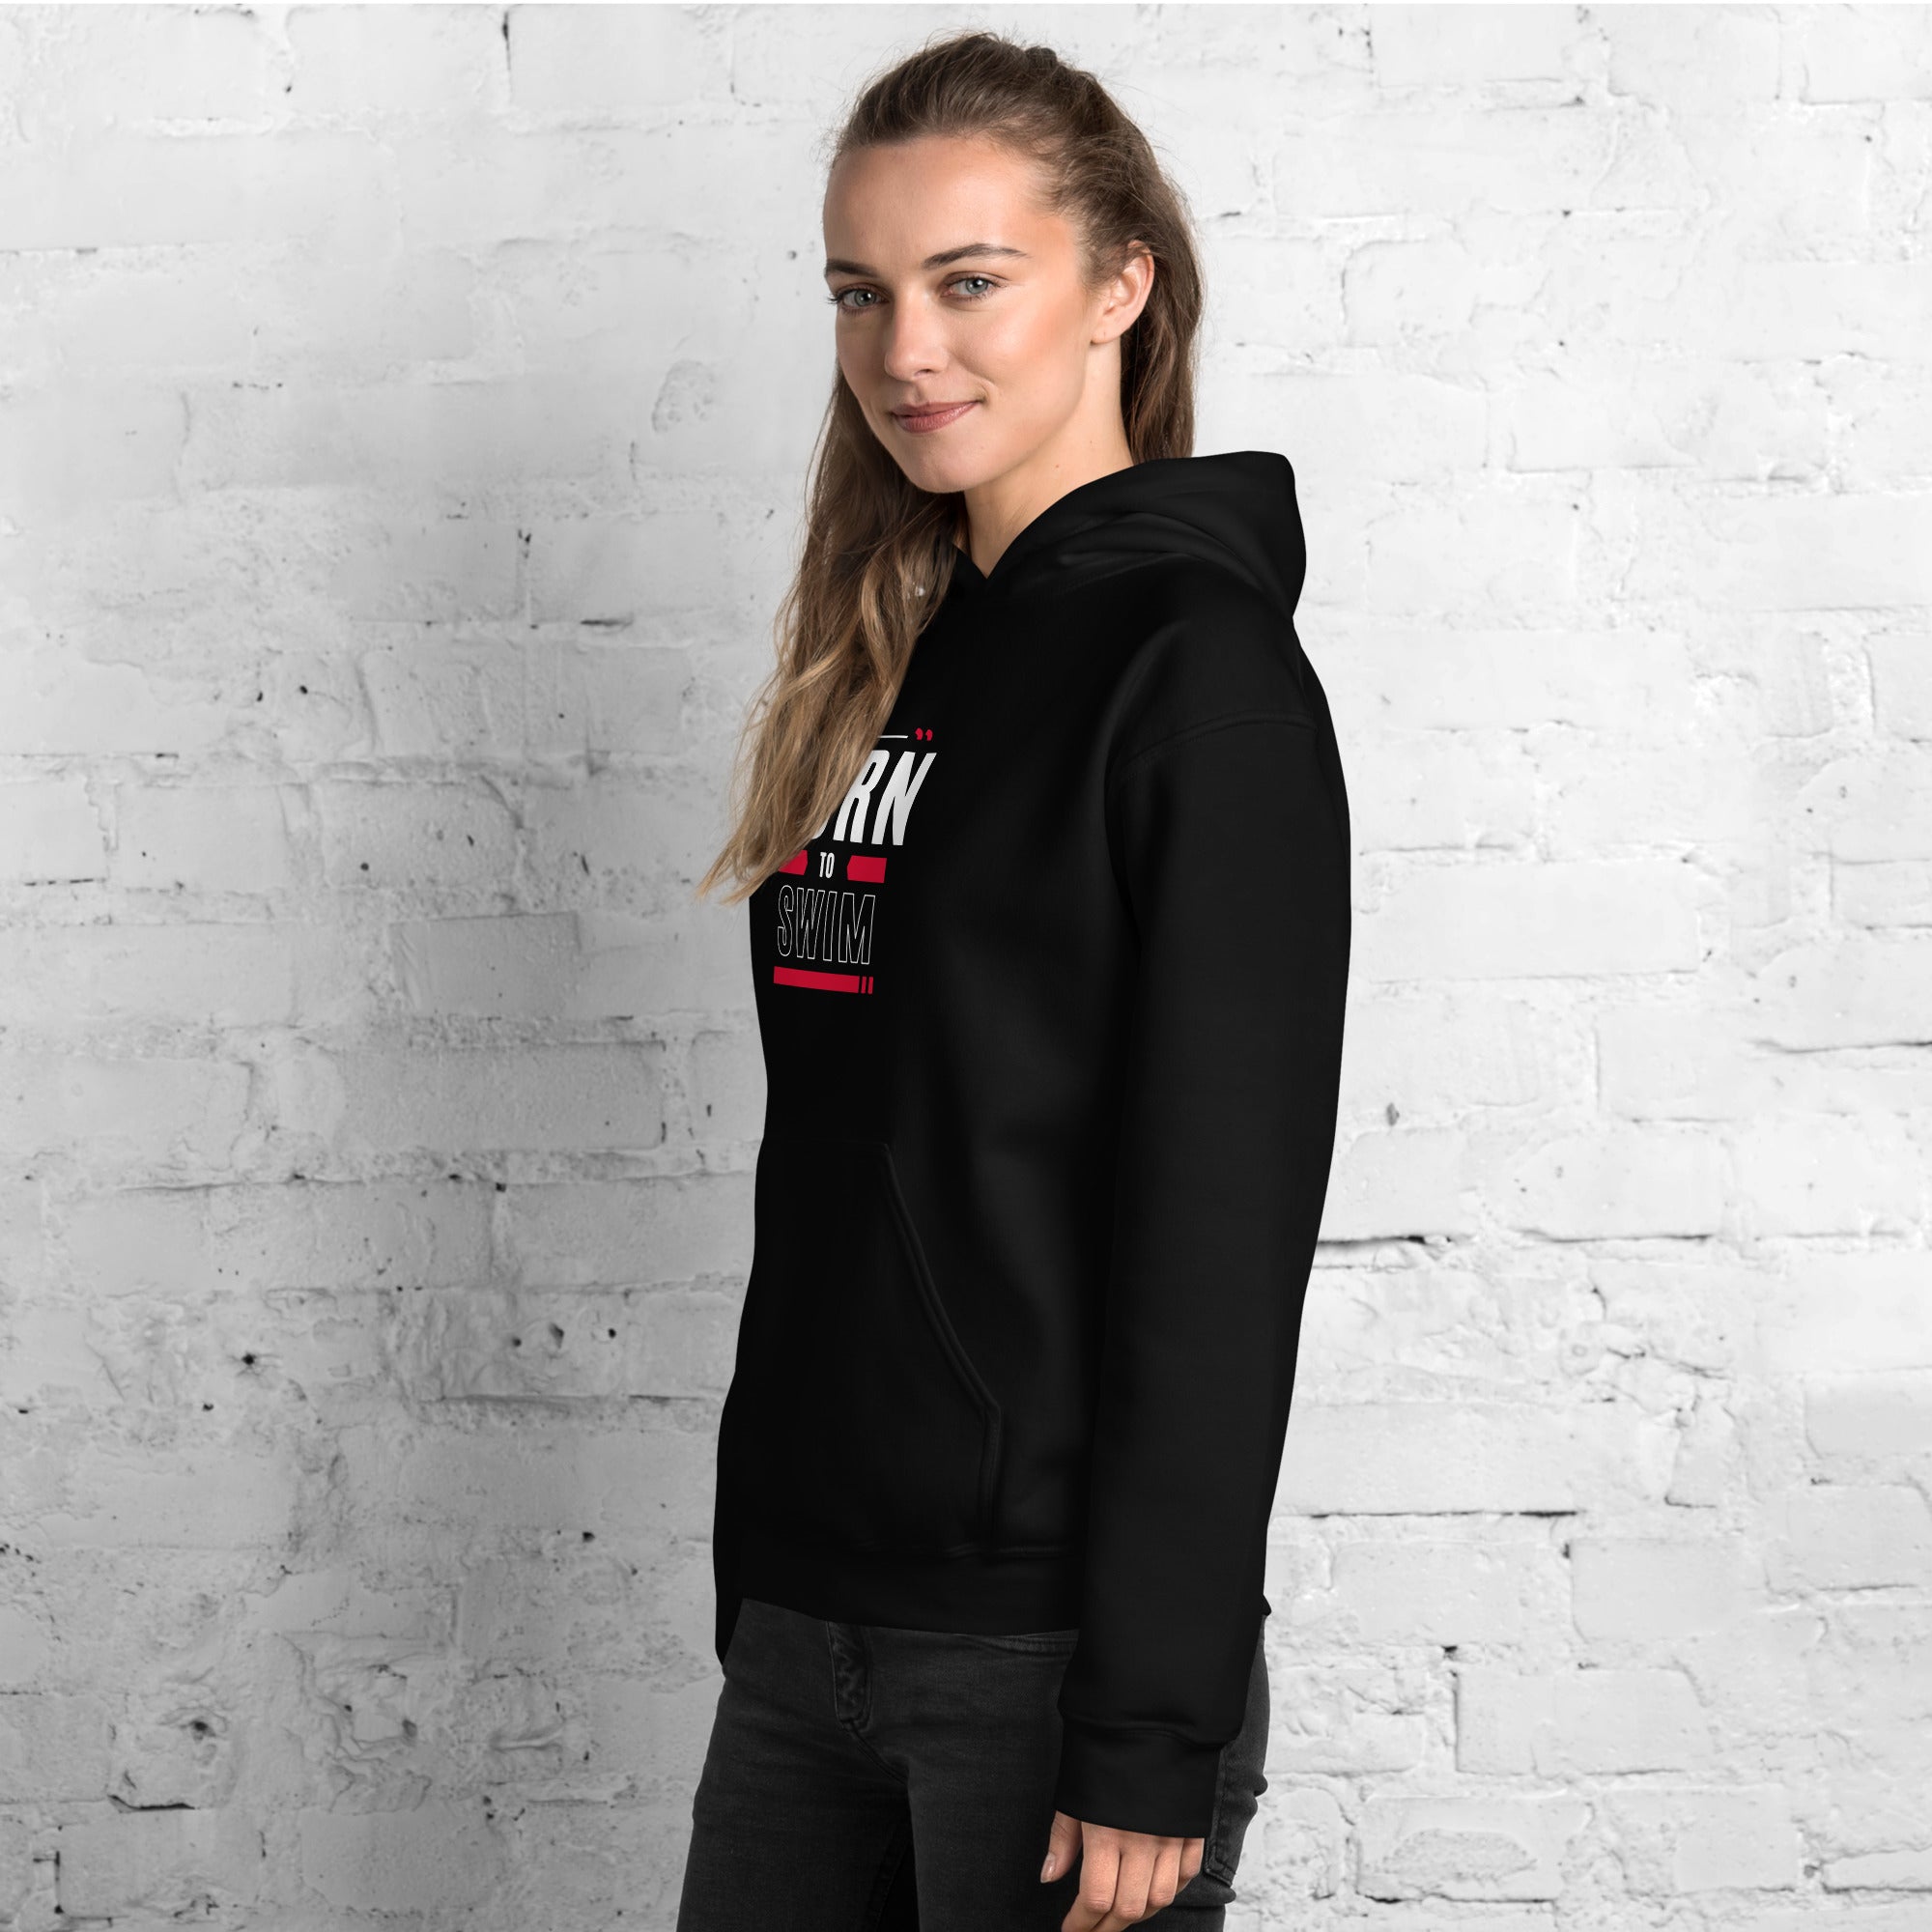 Swimmers - Find Your Perfect Born To Swim Hoodie 